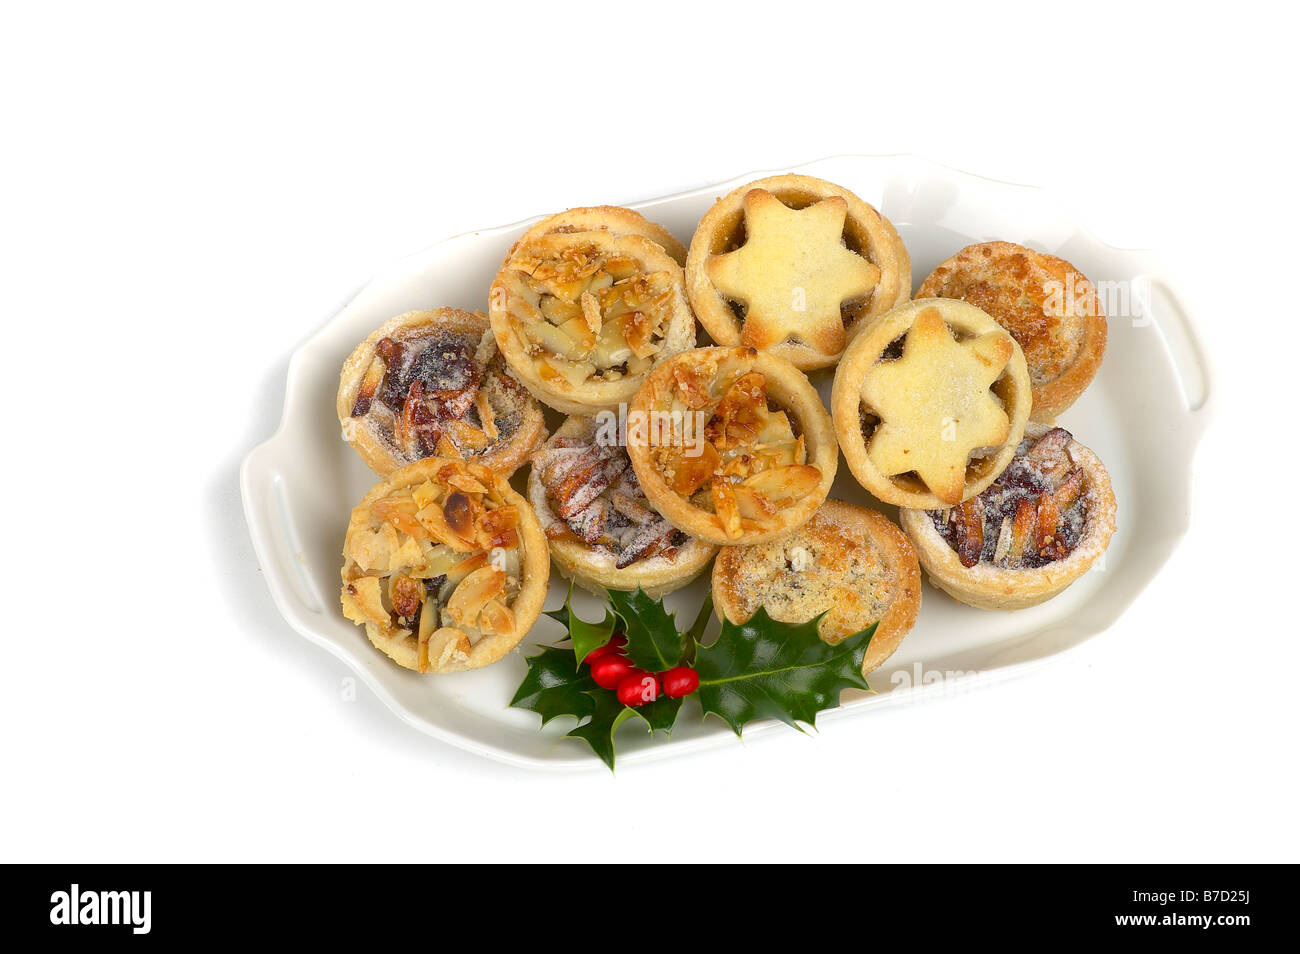 MINCE PIES ON A PLATE CHRISTMAS FOOD Stock Photo